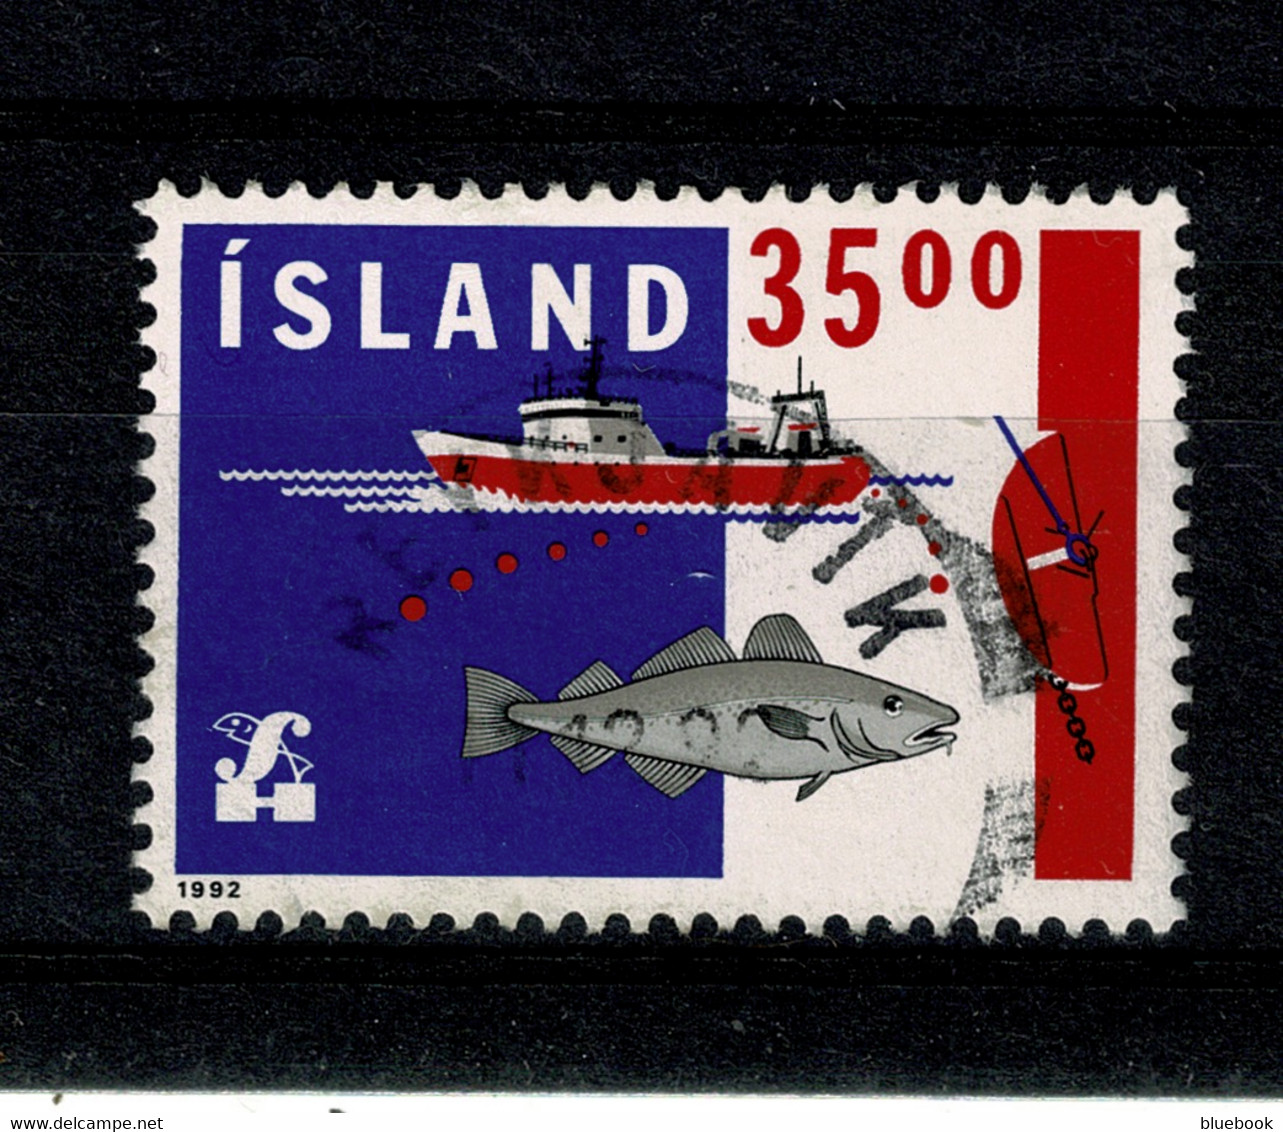 Ref 1451 - 1992 Iceland - 55k Camber Of Commerce - Trawler Ship - Used Stamp - SG 780 - Transport Theme - Used Stamps